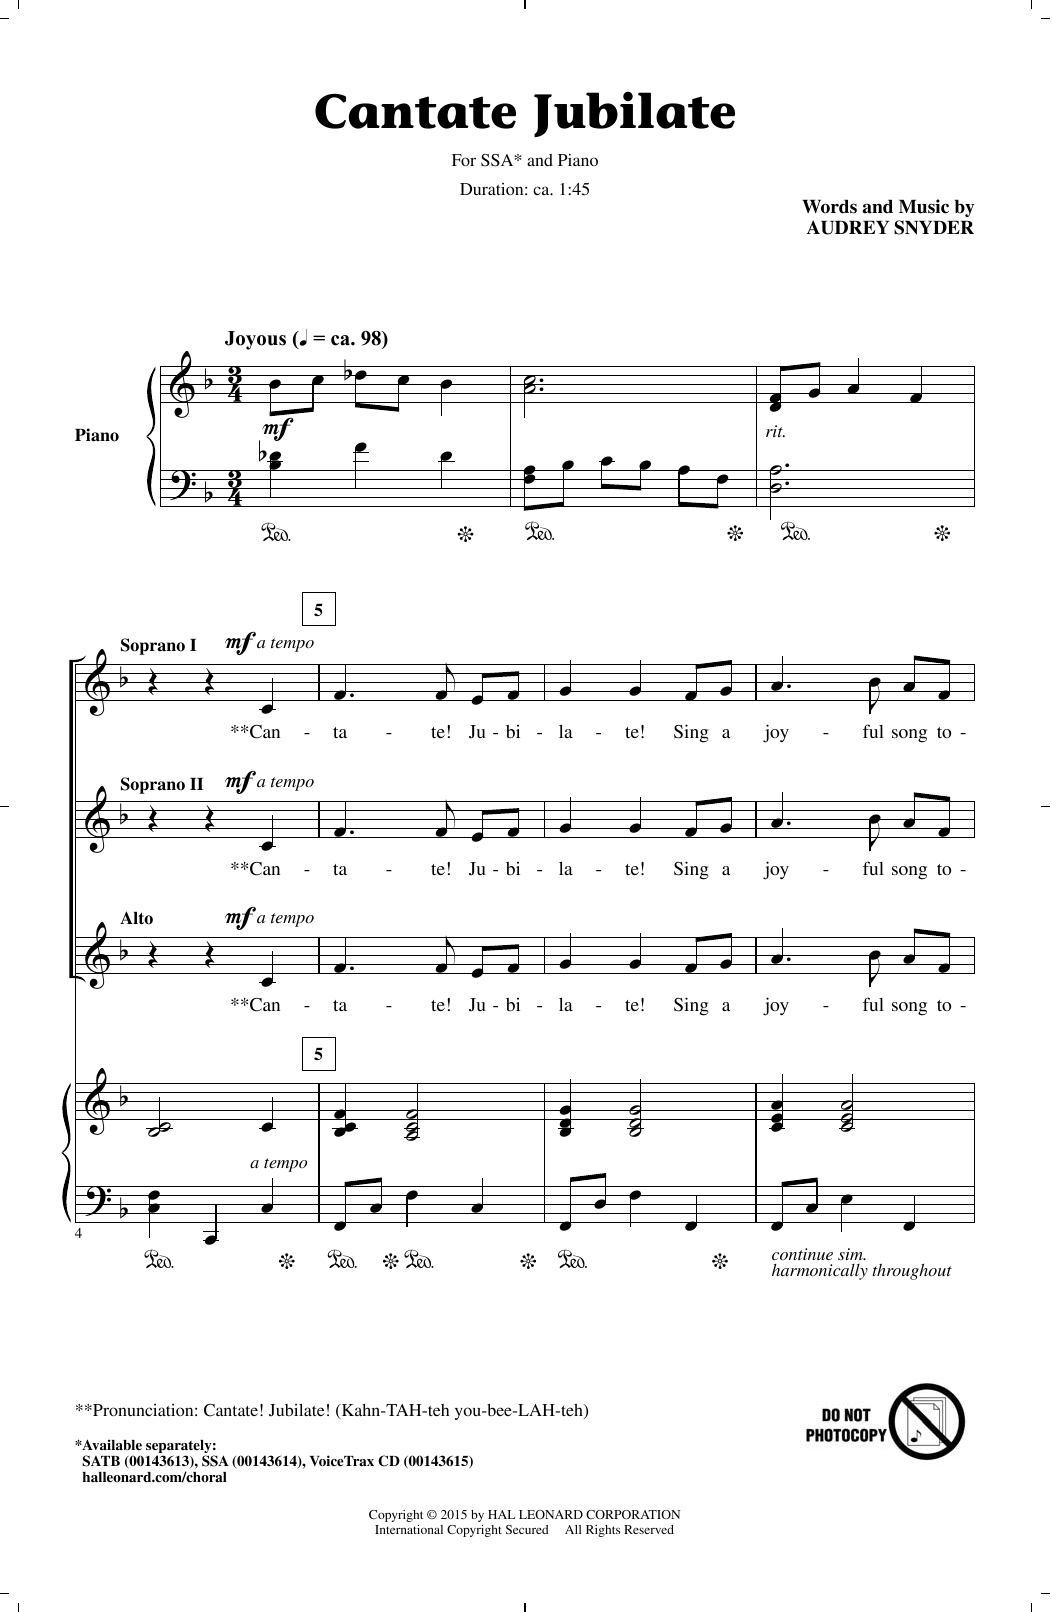 Download Audrey Snyder Cantate Jubilate Sheet Music